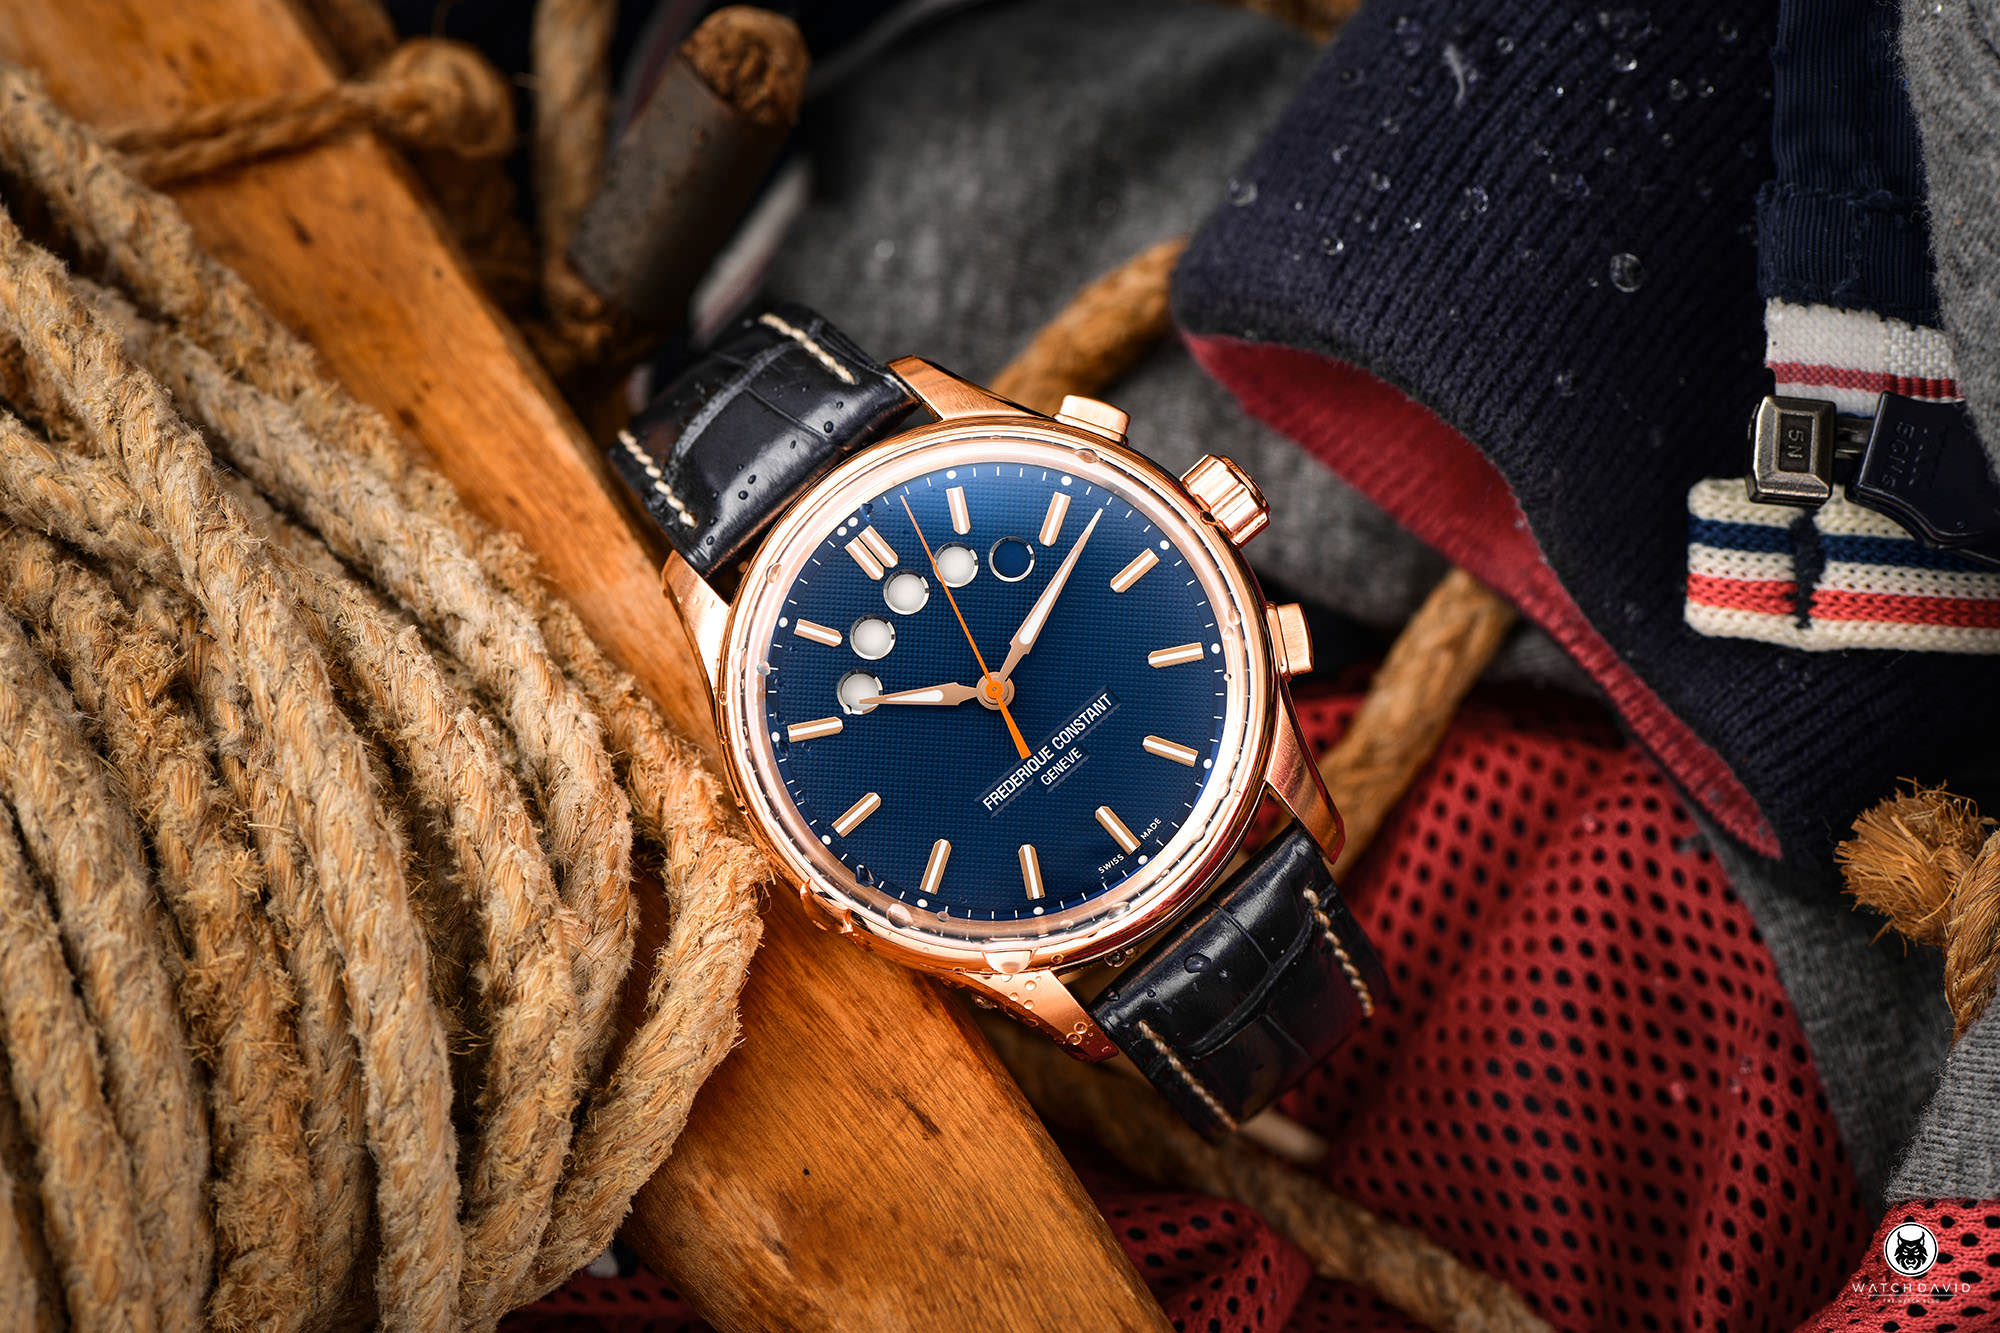 Sailing Watches Inspired by the Sea | Bob's Watches